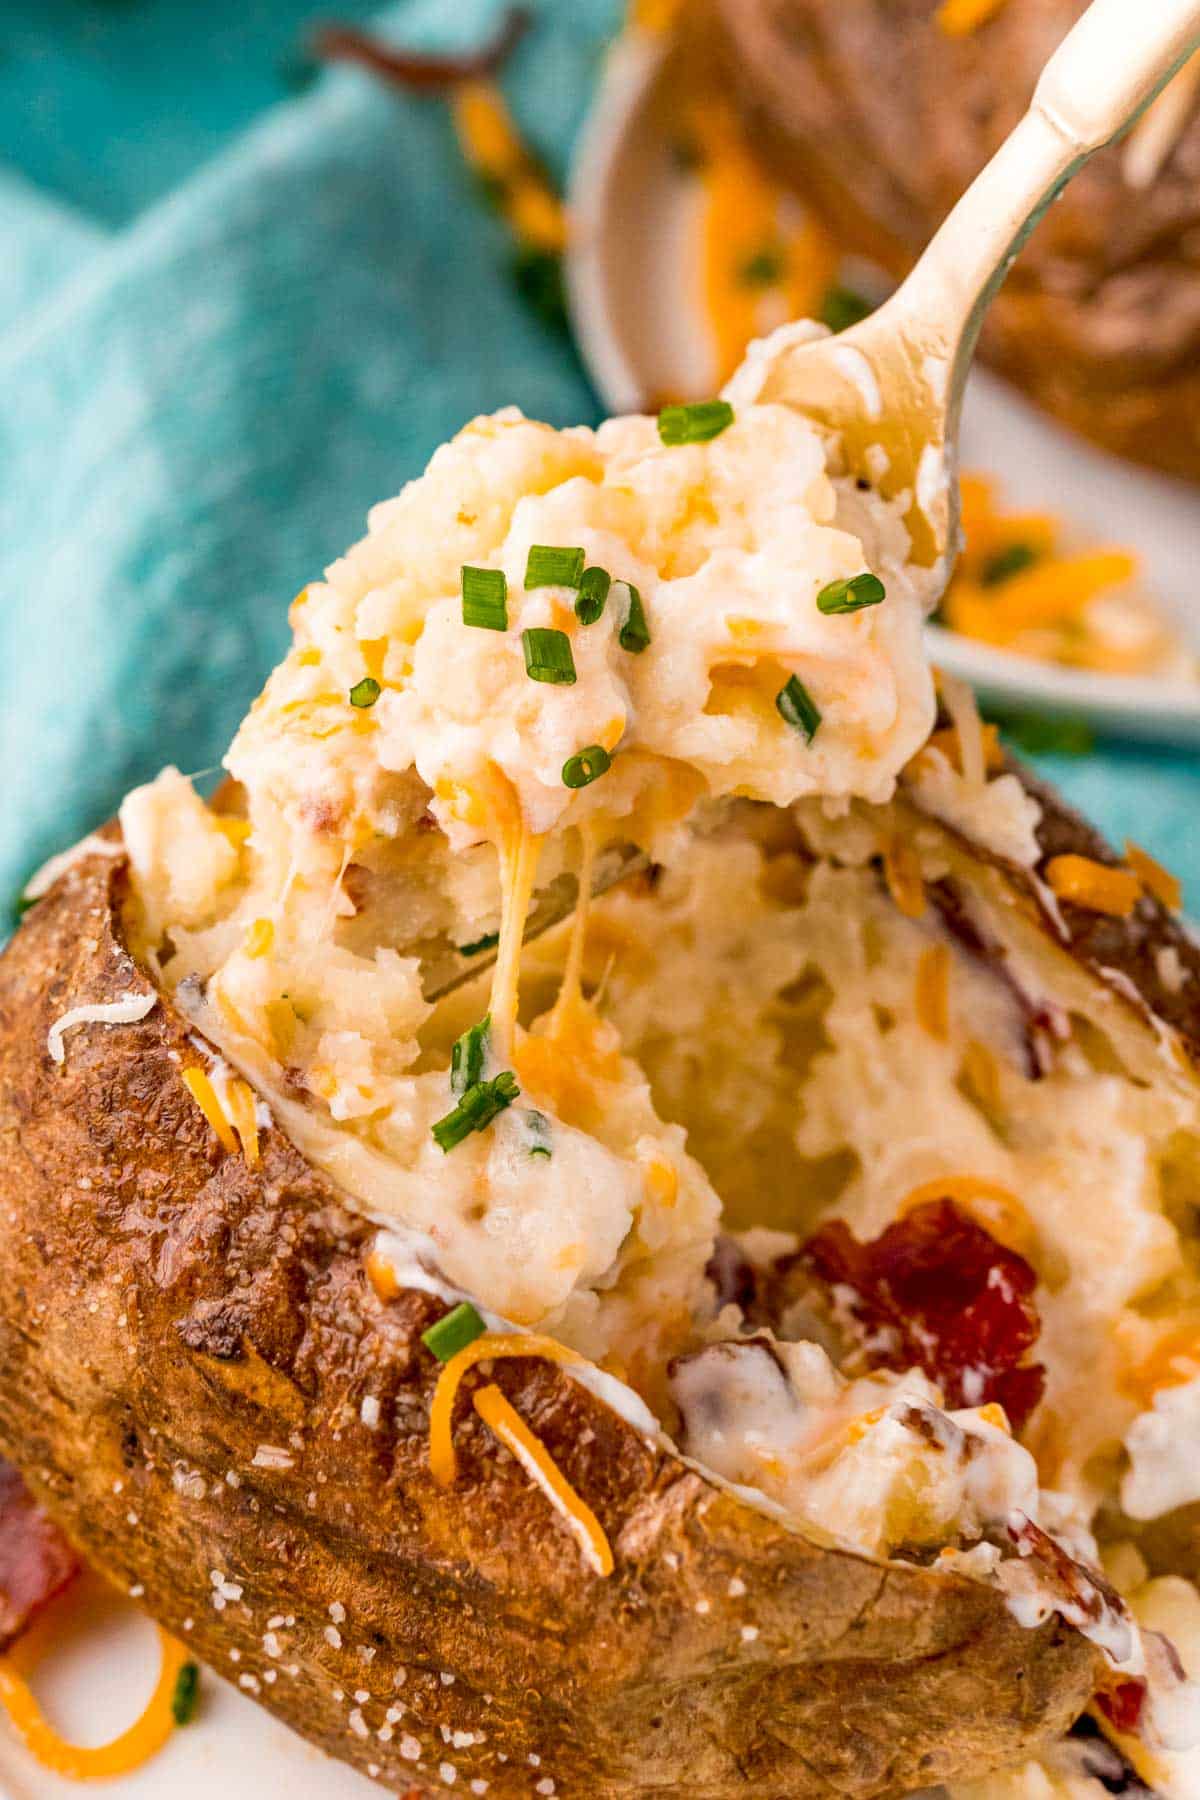 A fork scooping the inside of a baked potato out.